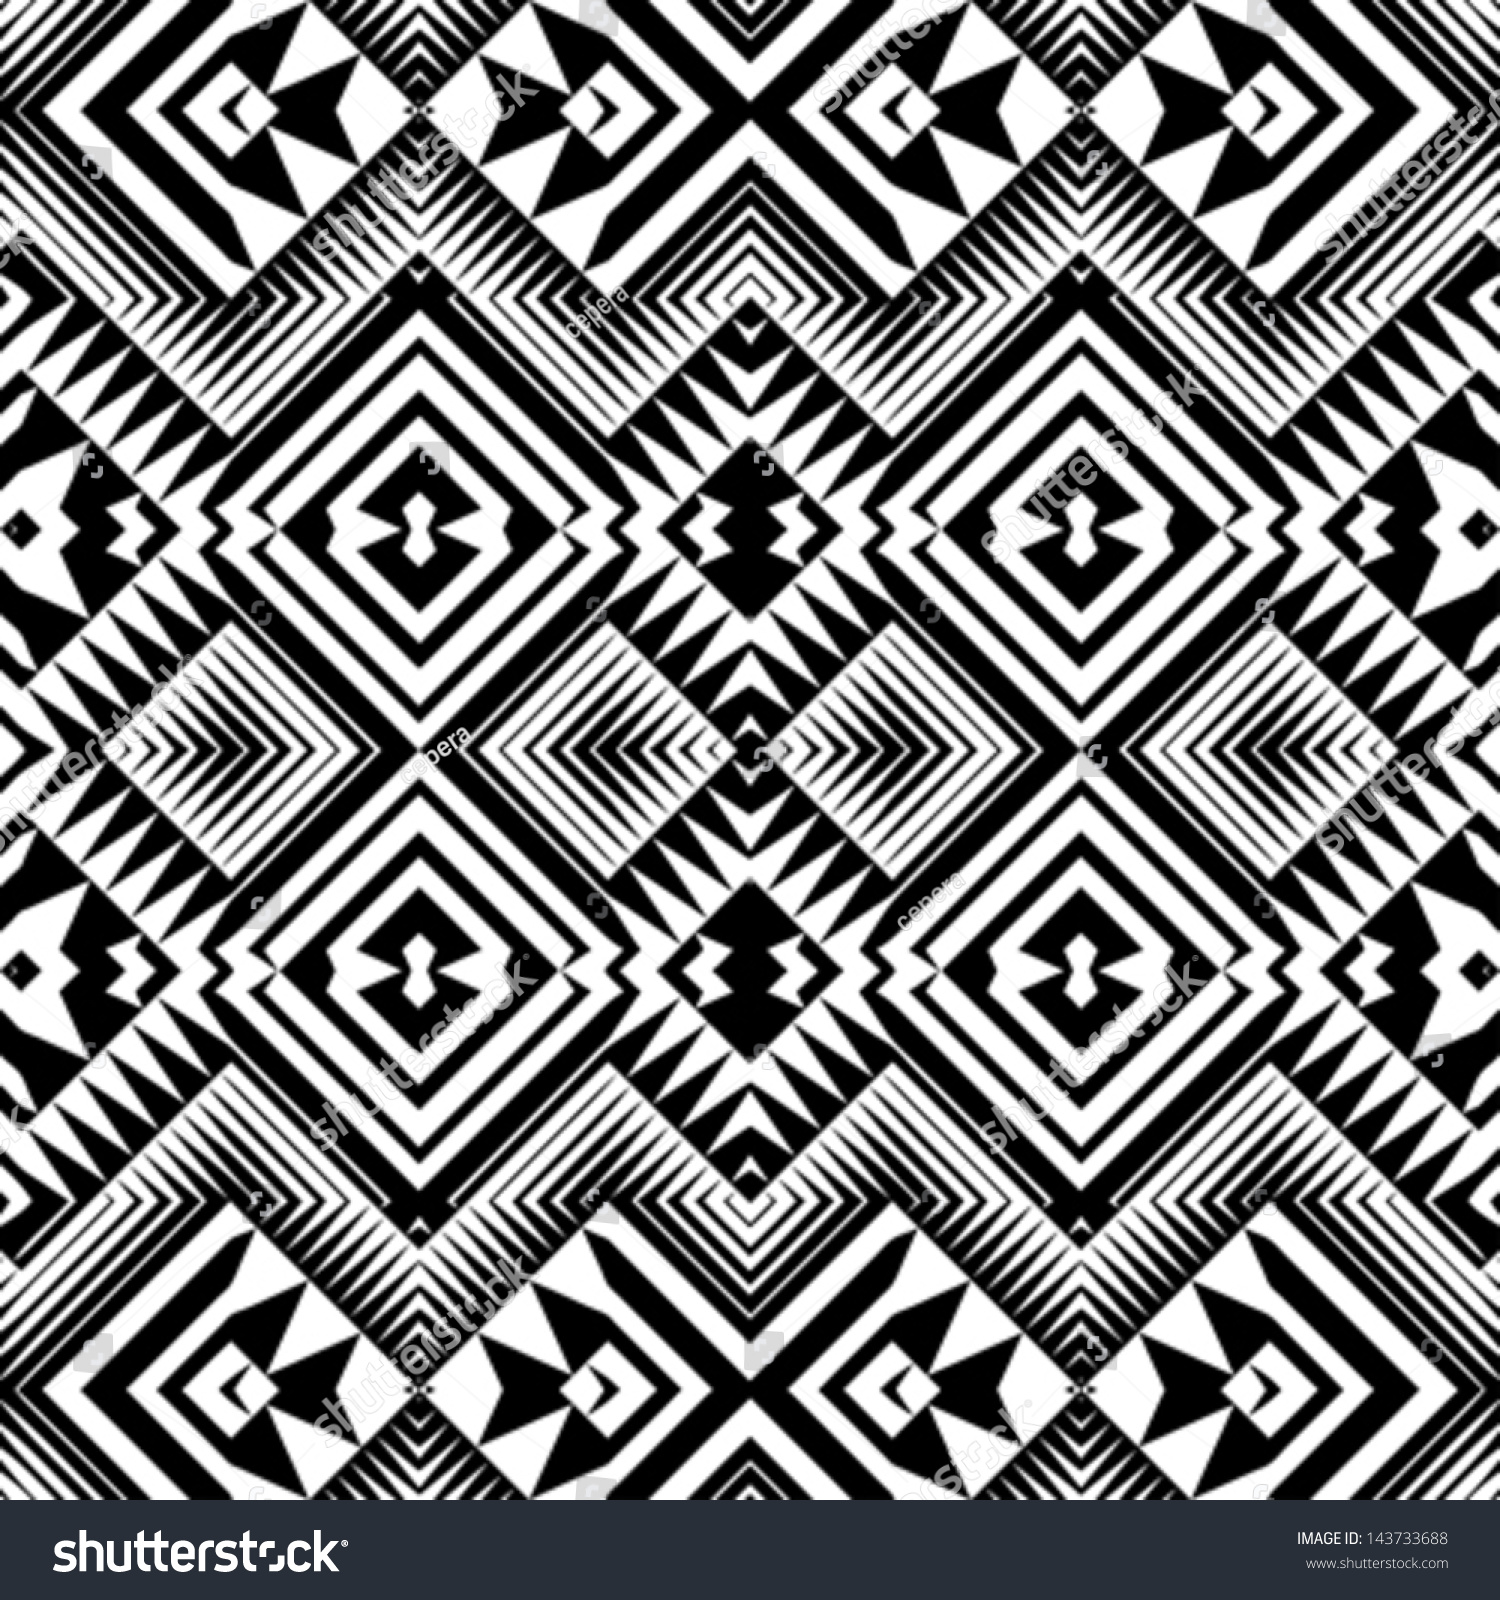 Abstract Geometric Textured Seamless Pattern. Vector. - 143733688 ...